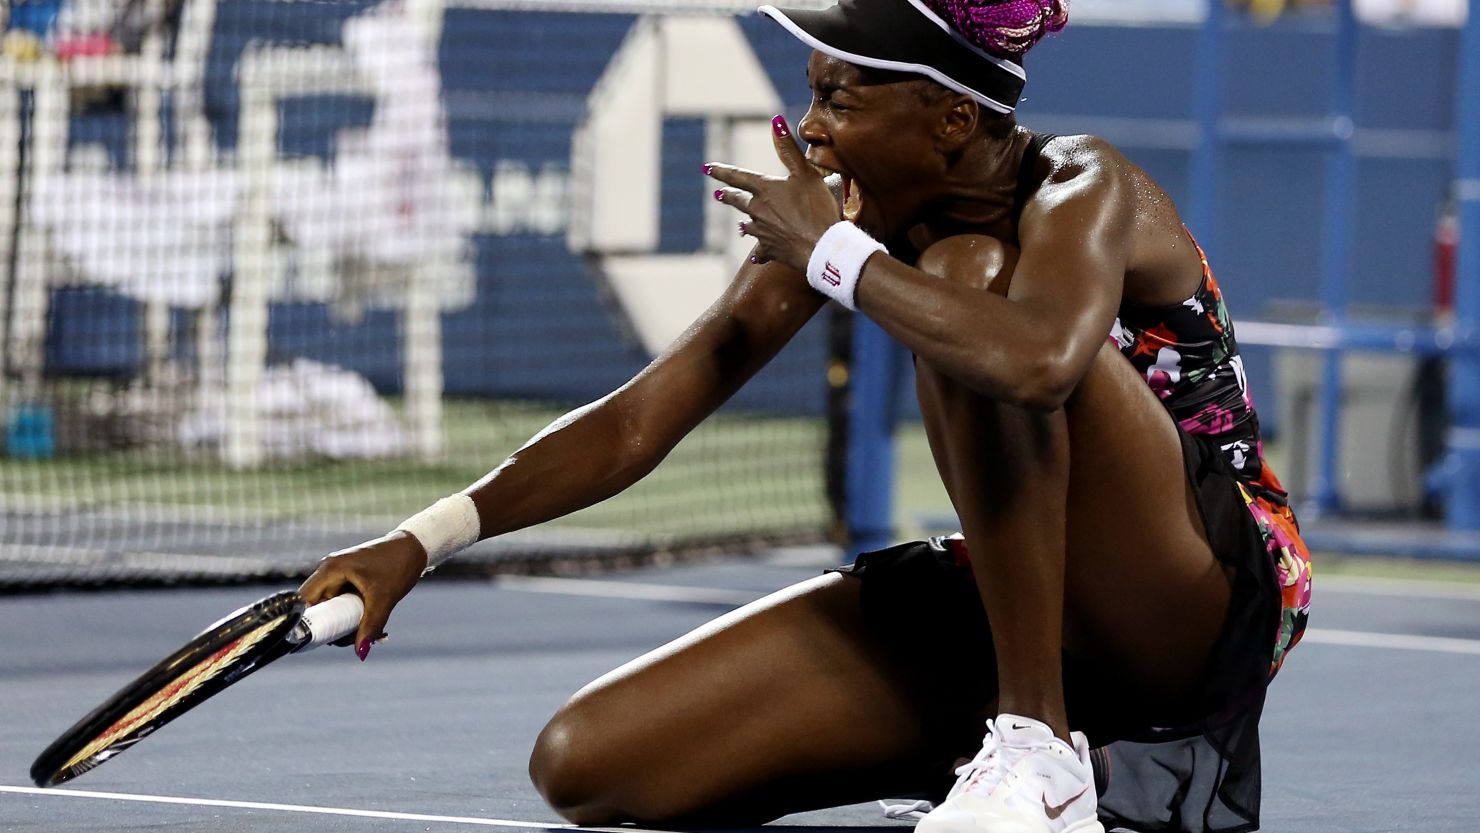 Venus Williams won the women's singles title at Flushing Meadows in 2000 and 2001.